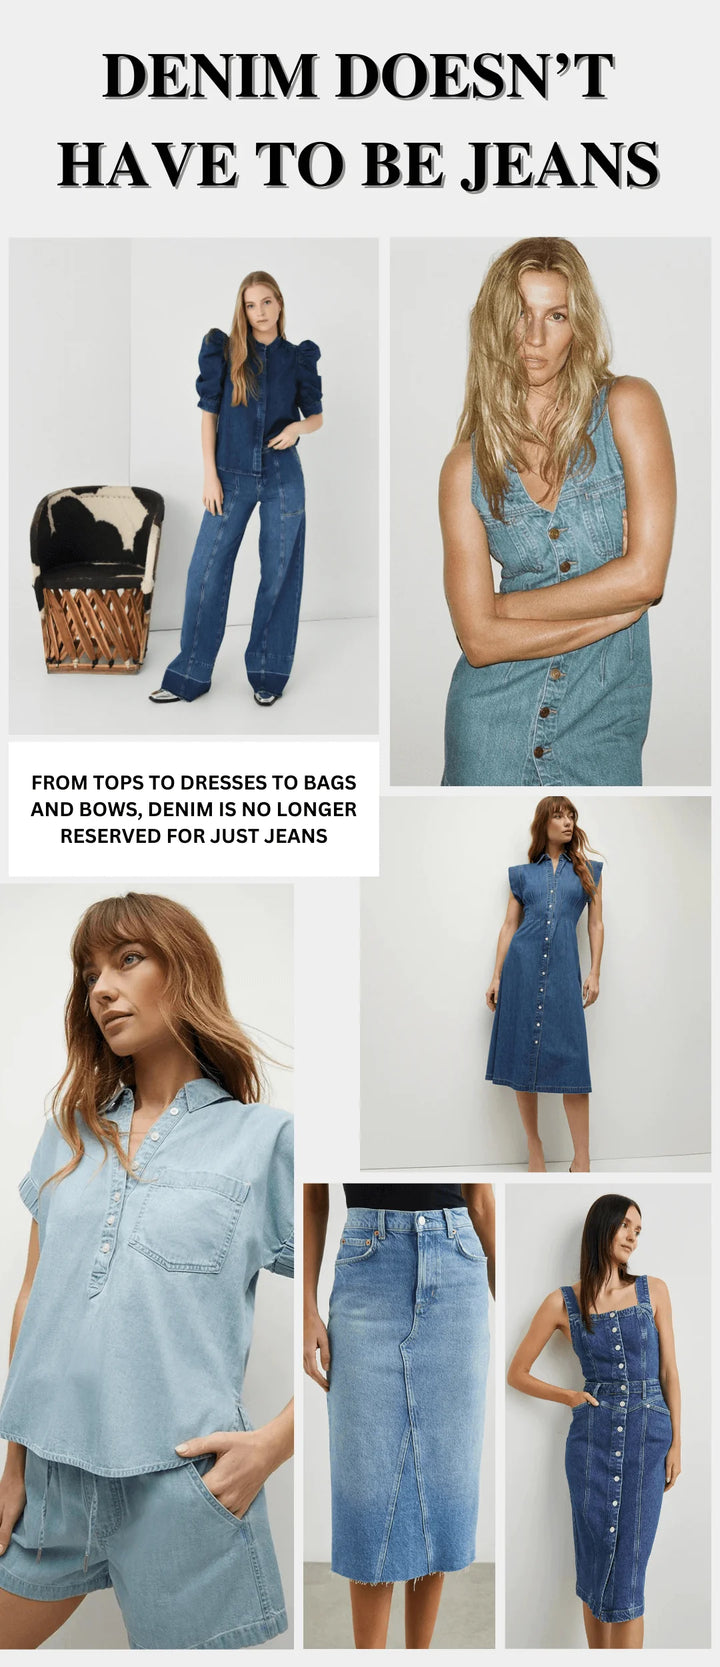 Denim is Not Just for Jeans